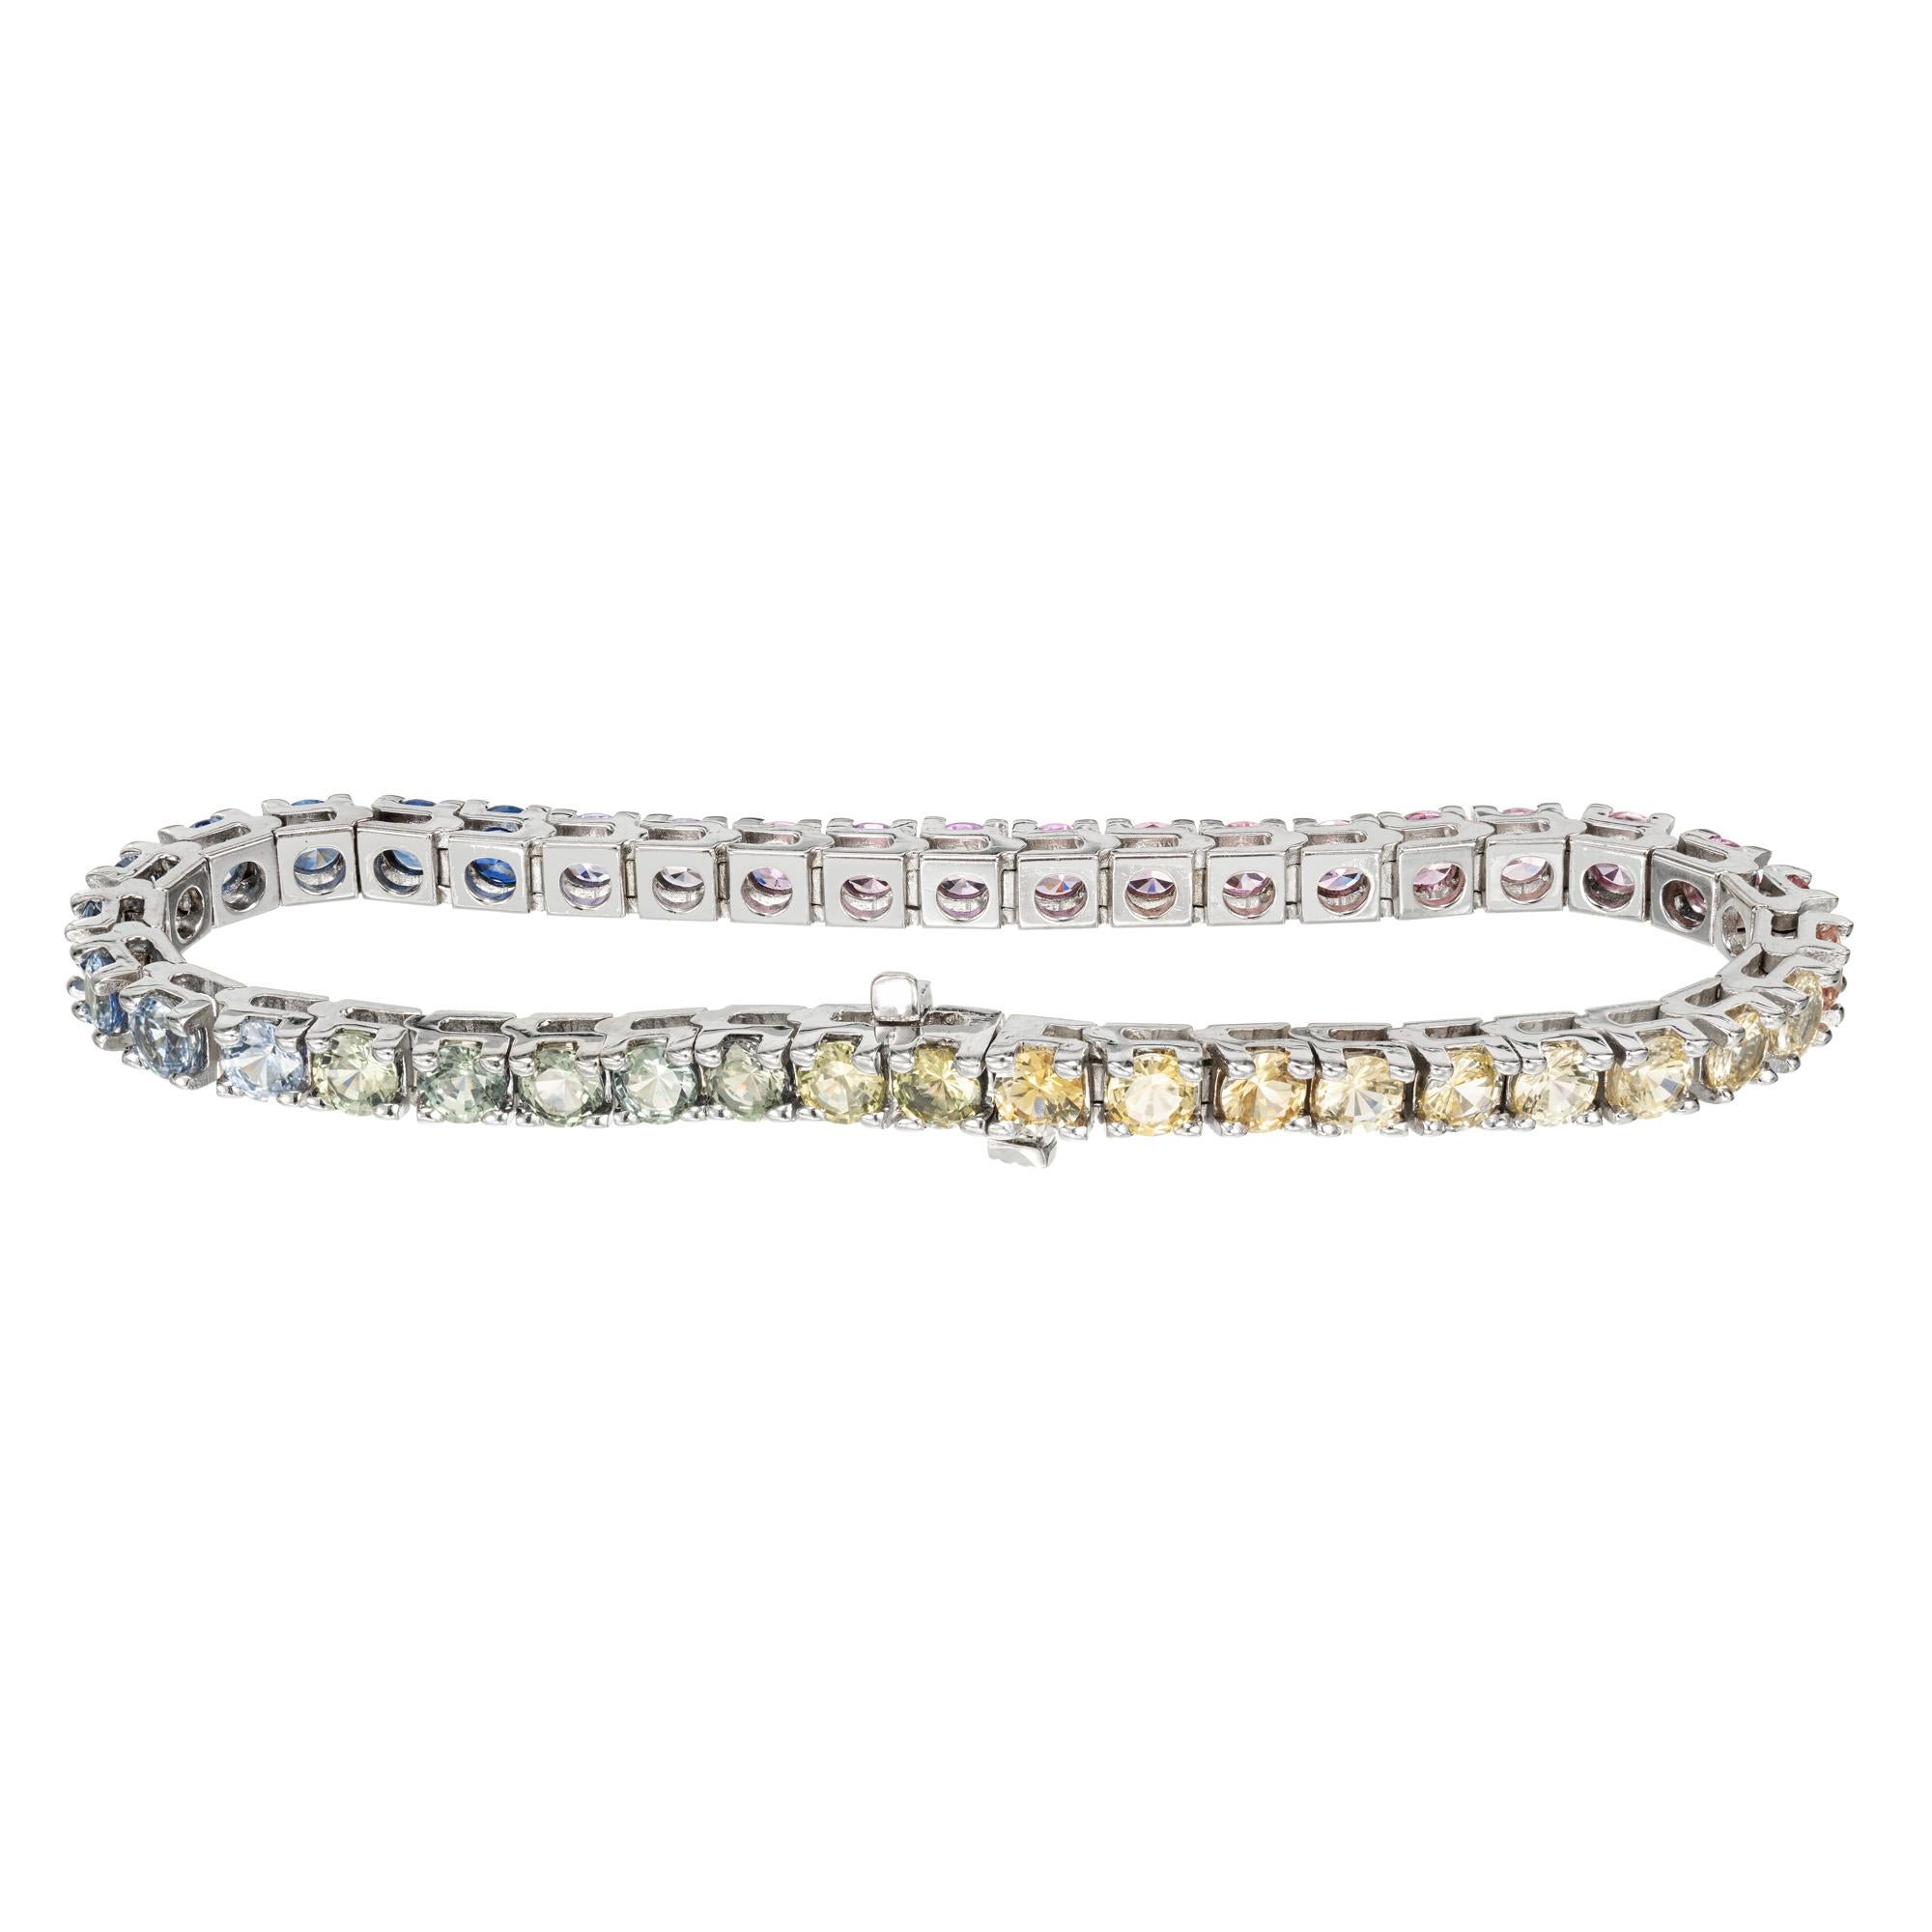 Multi-color genuine Sapphire hinged link tennis bracelet. 40 multicolor sapphires- blended blue, yellow, pink and green Sapphires set in 14k white gold. Created in the Peter Suchy Workshop. Built in catch and underside safety. 7.25 inches. 

40